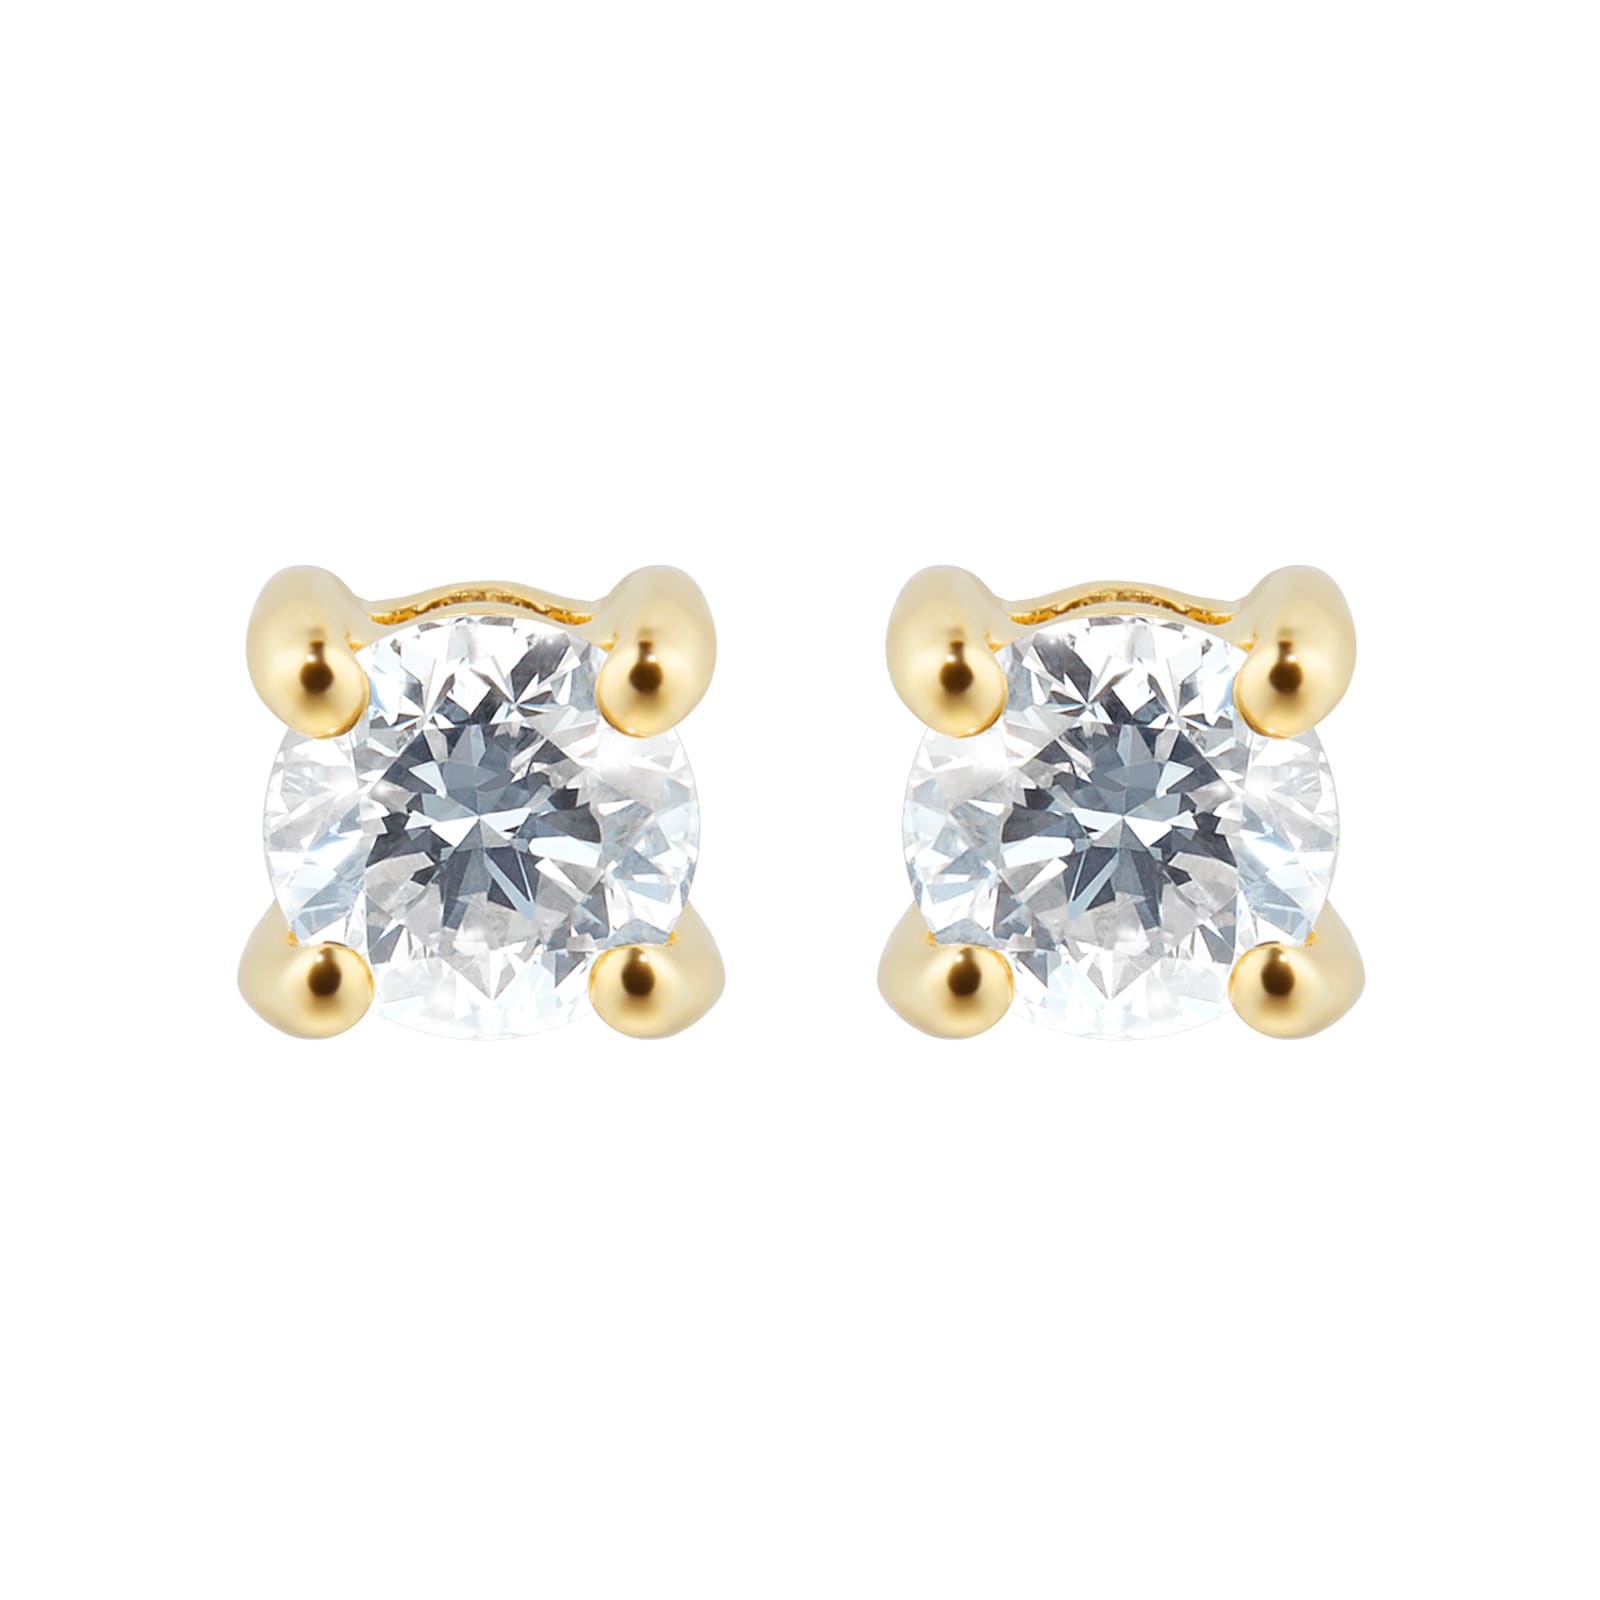 Libretto 18ct Yellow Gold 0.30cttw Diamond Earrings